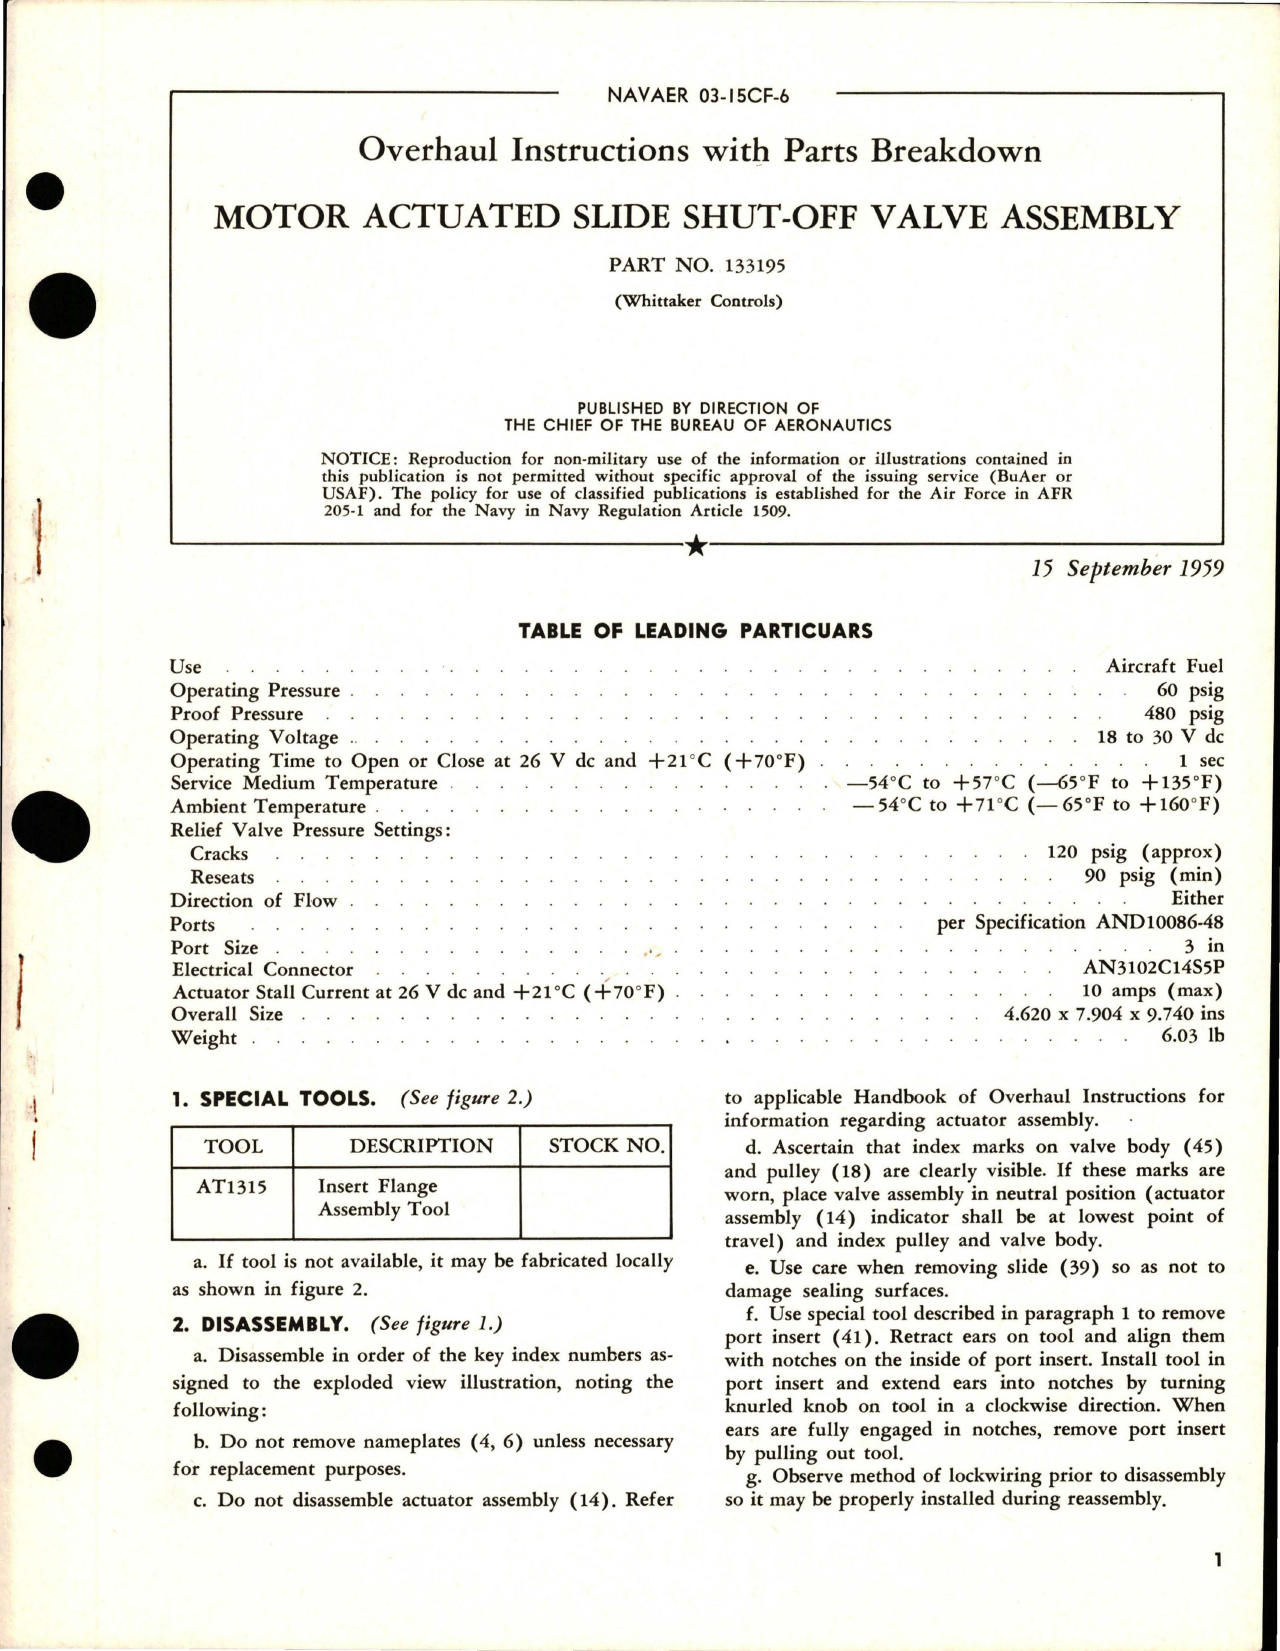 Sample page 1 from AirCorps Library document: Overhaul Instructions with Parts Breakdown for Motor Actuated Slide Shut-Off Valve Assembly - Part 133195 